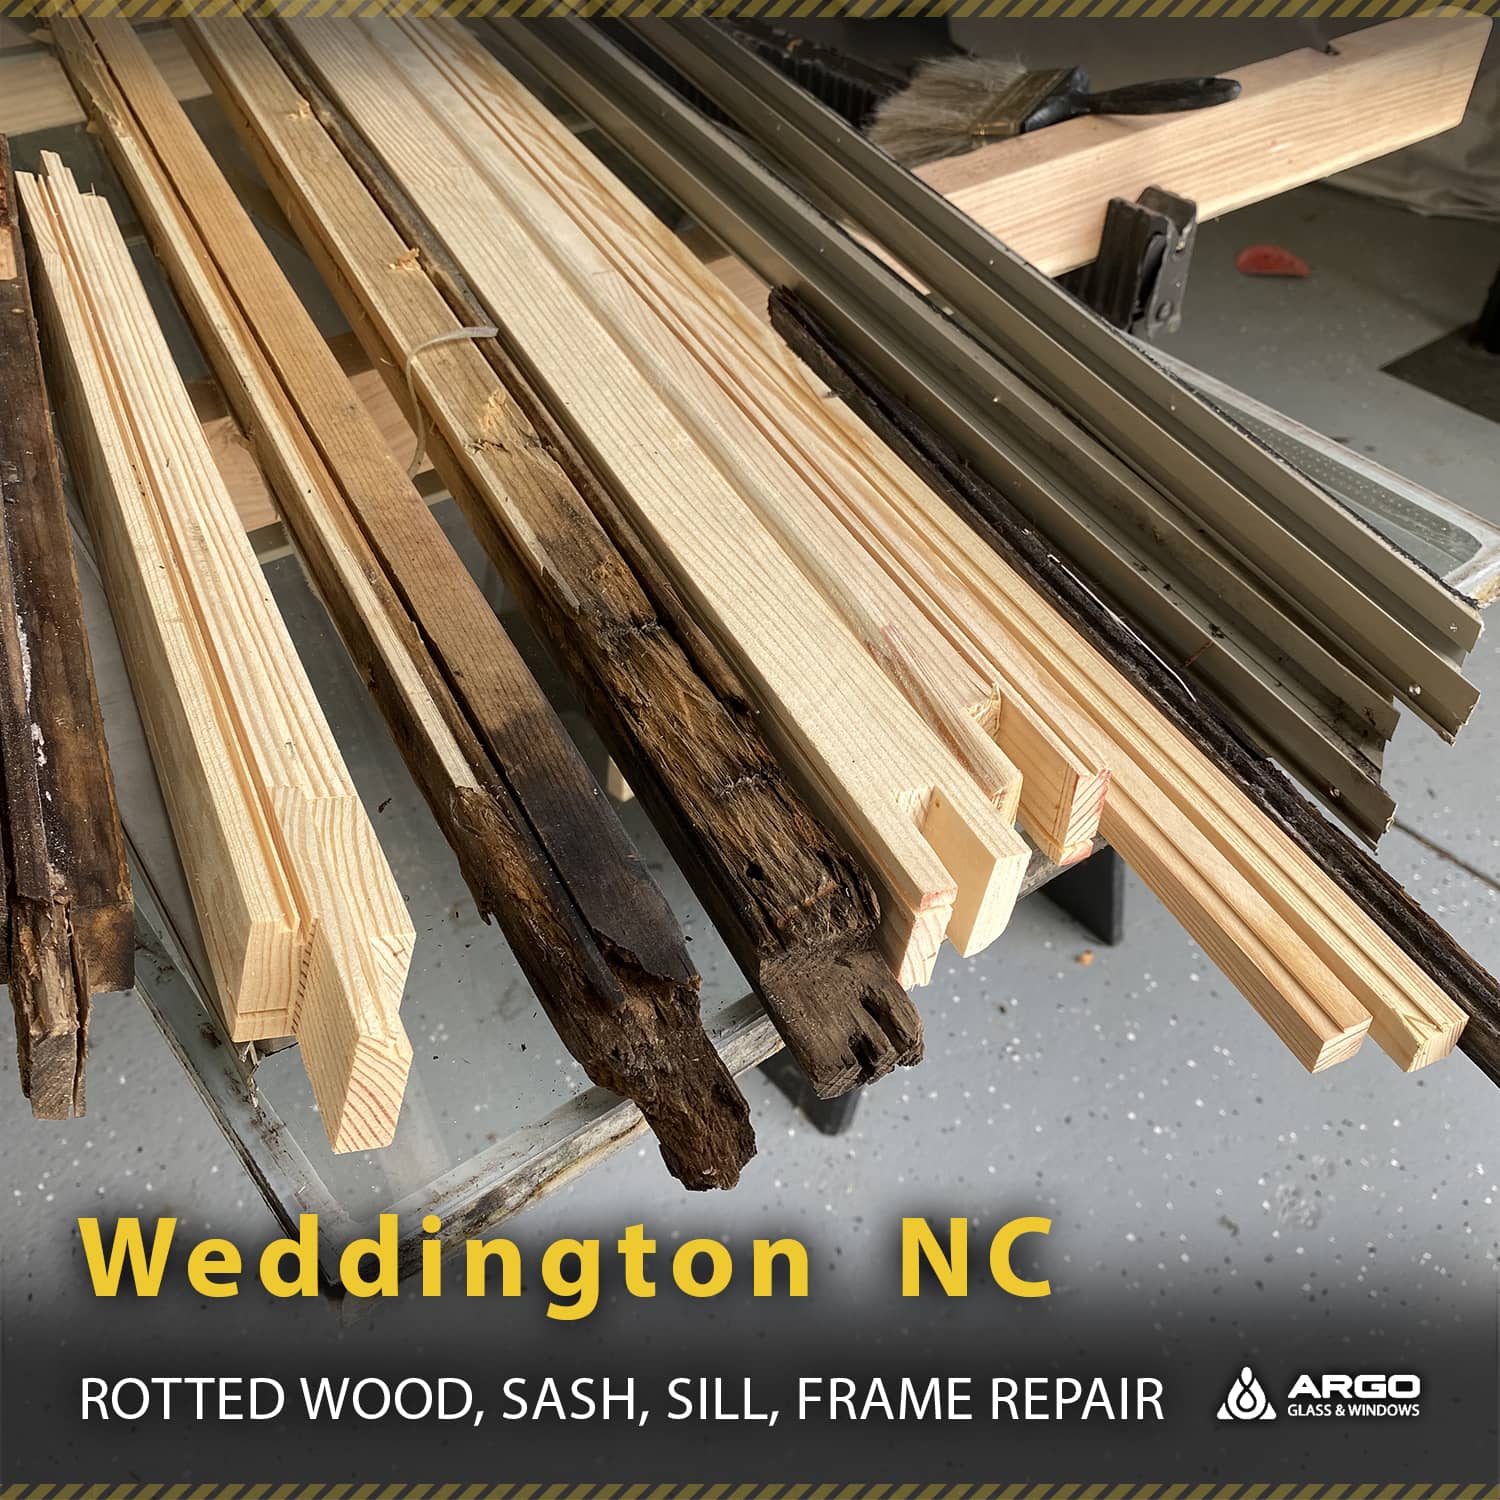 Professional Rotted Wood, Sash, Sill, Frame Repair company